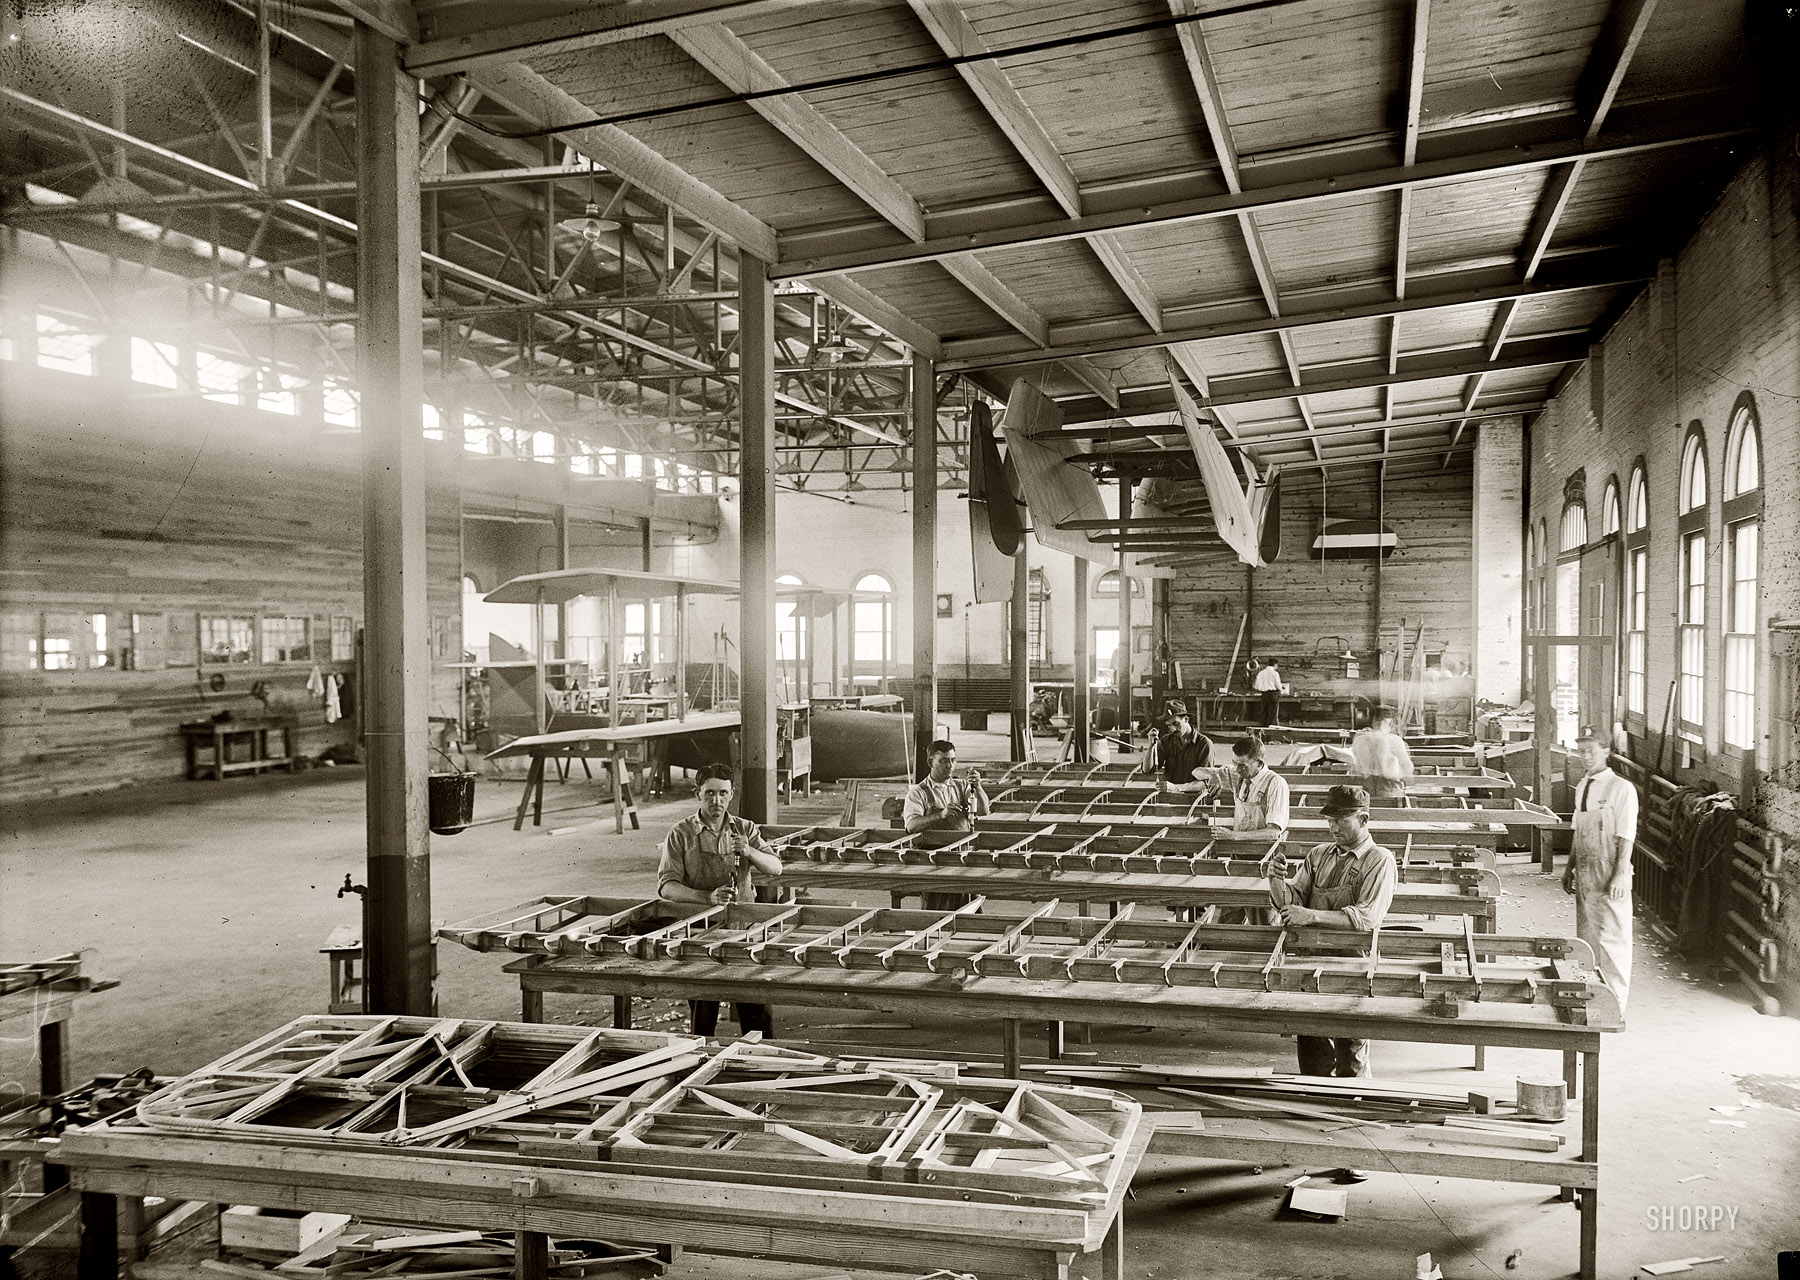 "Alexandria (Va.) airplane factory, 1918." Possibly the Kendrick Aeroplane Co., an enterprise described here. Harris & Ewing glass negative. View full size.